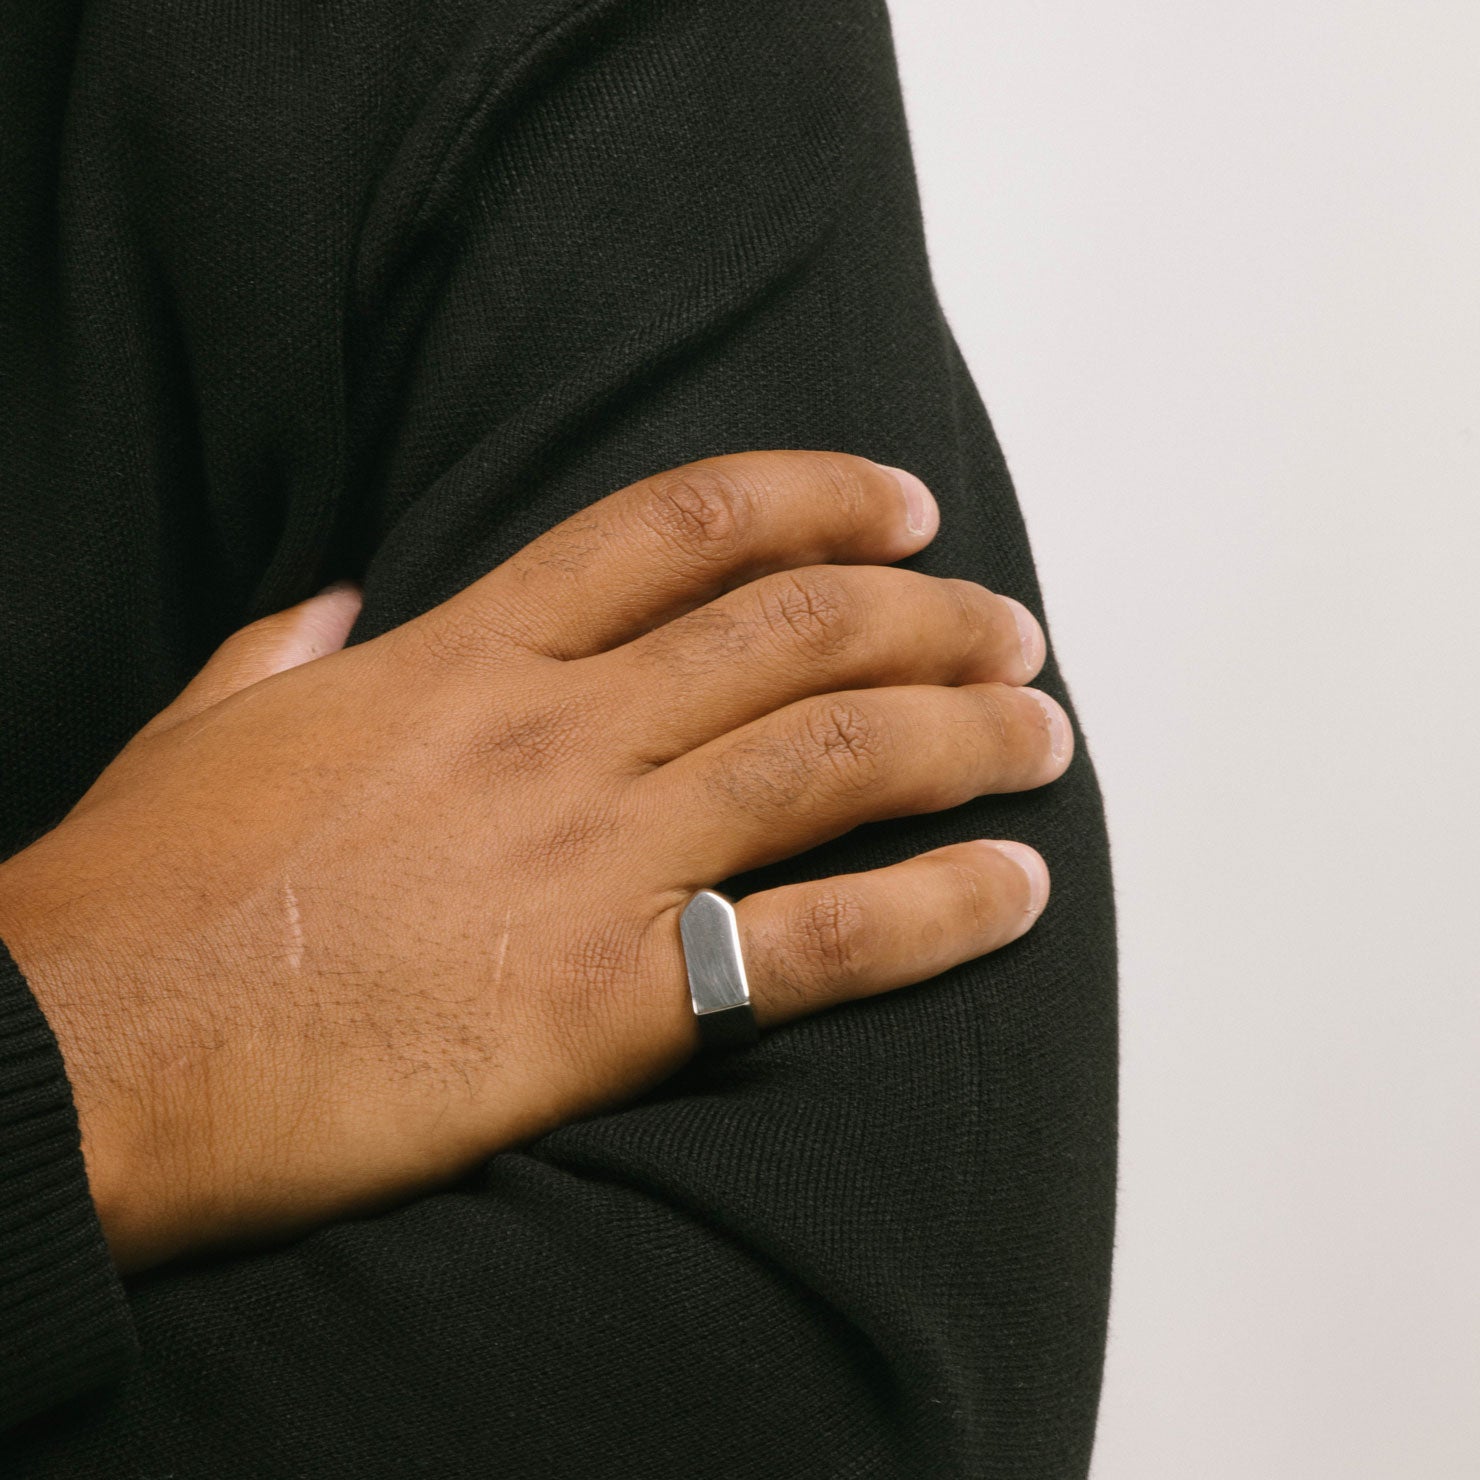 A model wearing the Pointed Band Ring in Silver is made using stainless steel and has a width of 8mm. Its superior construction provides lasting durability and protection from water damage and tarnishing.